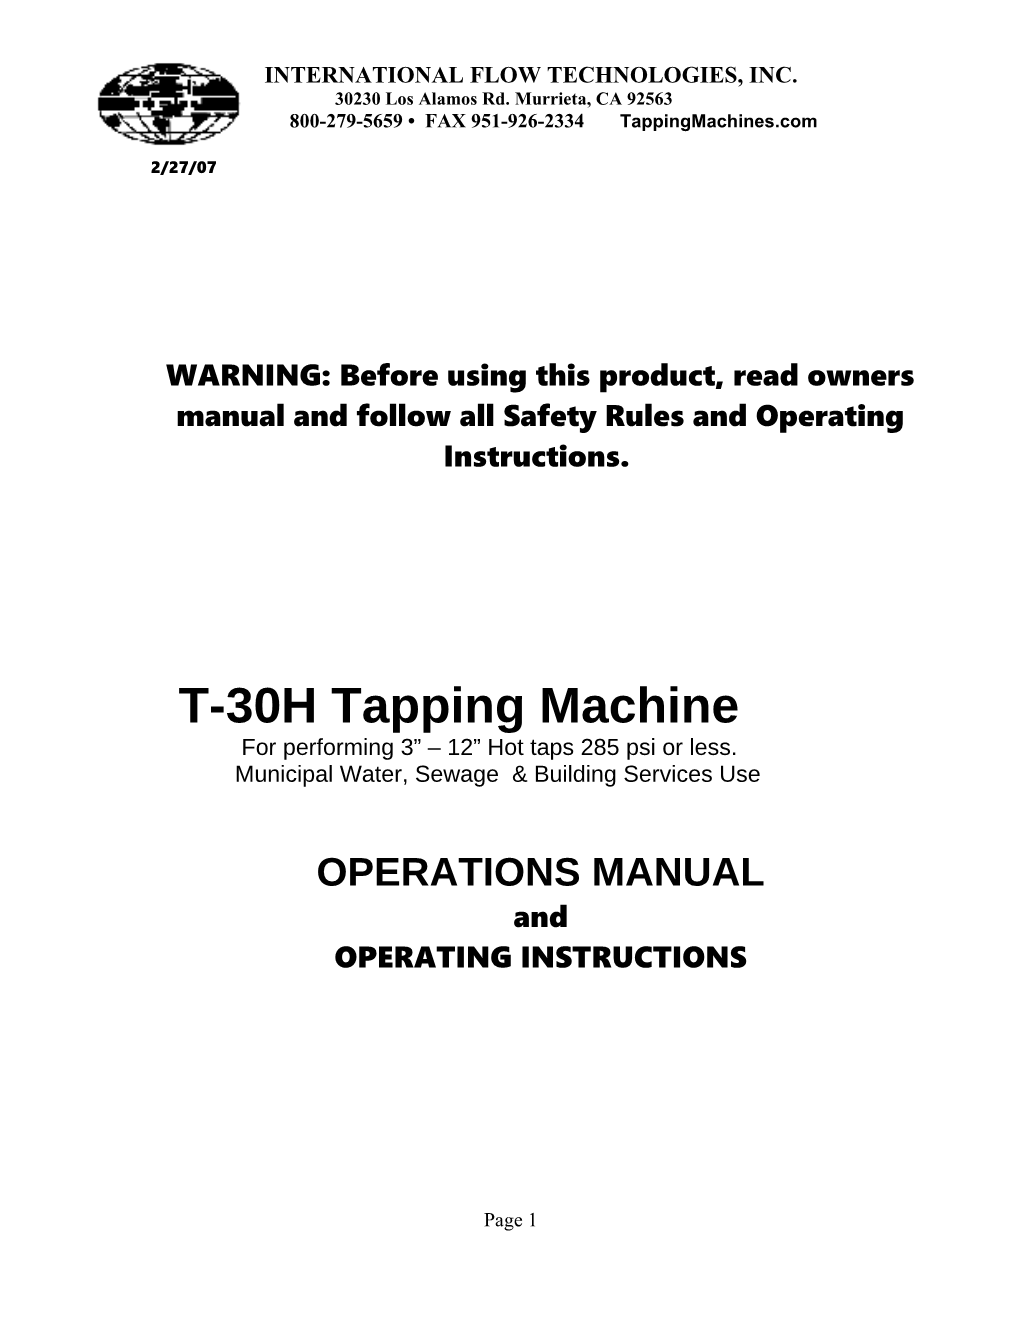 T-30H Tapping Machine